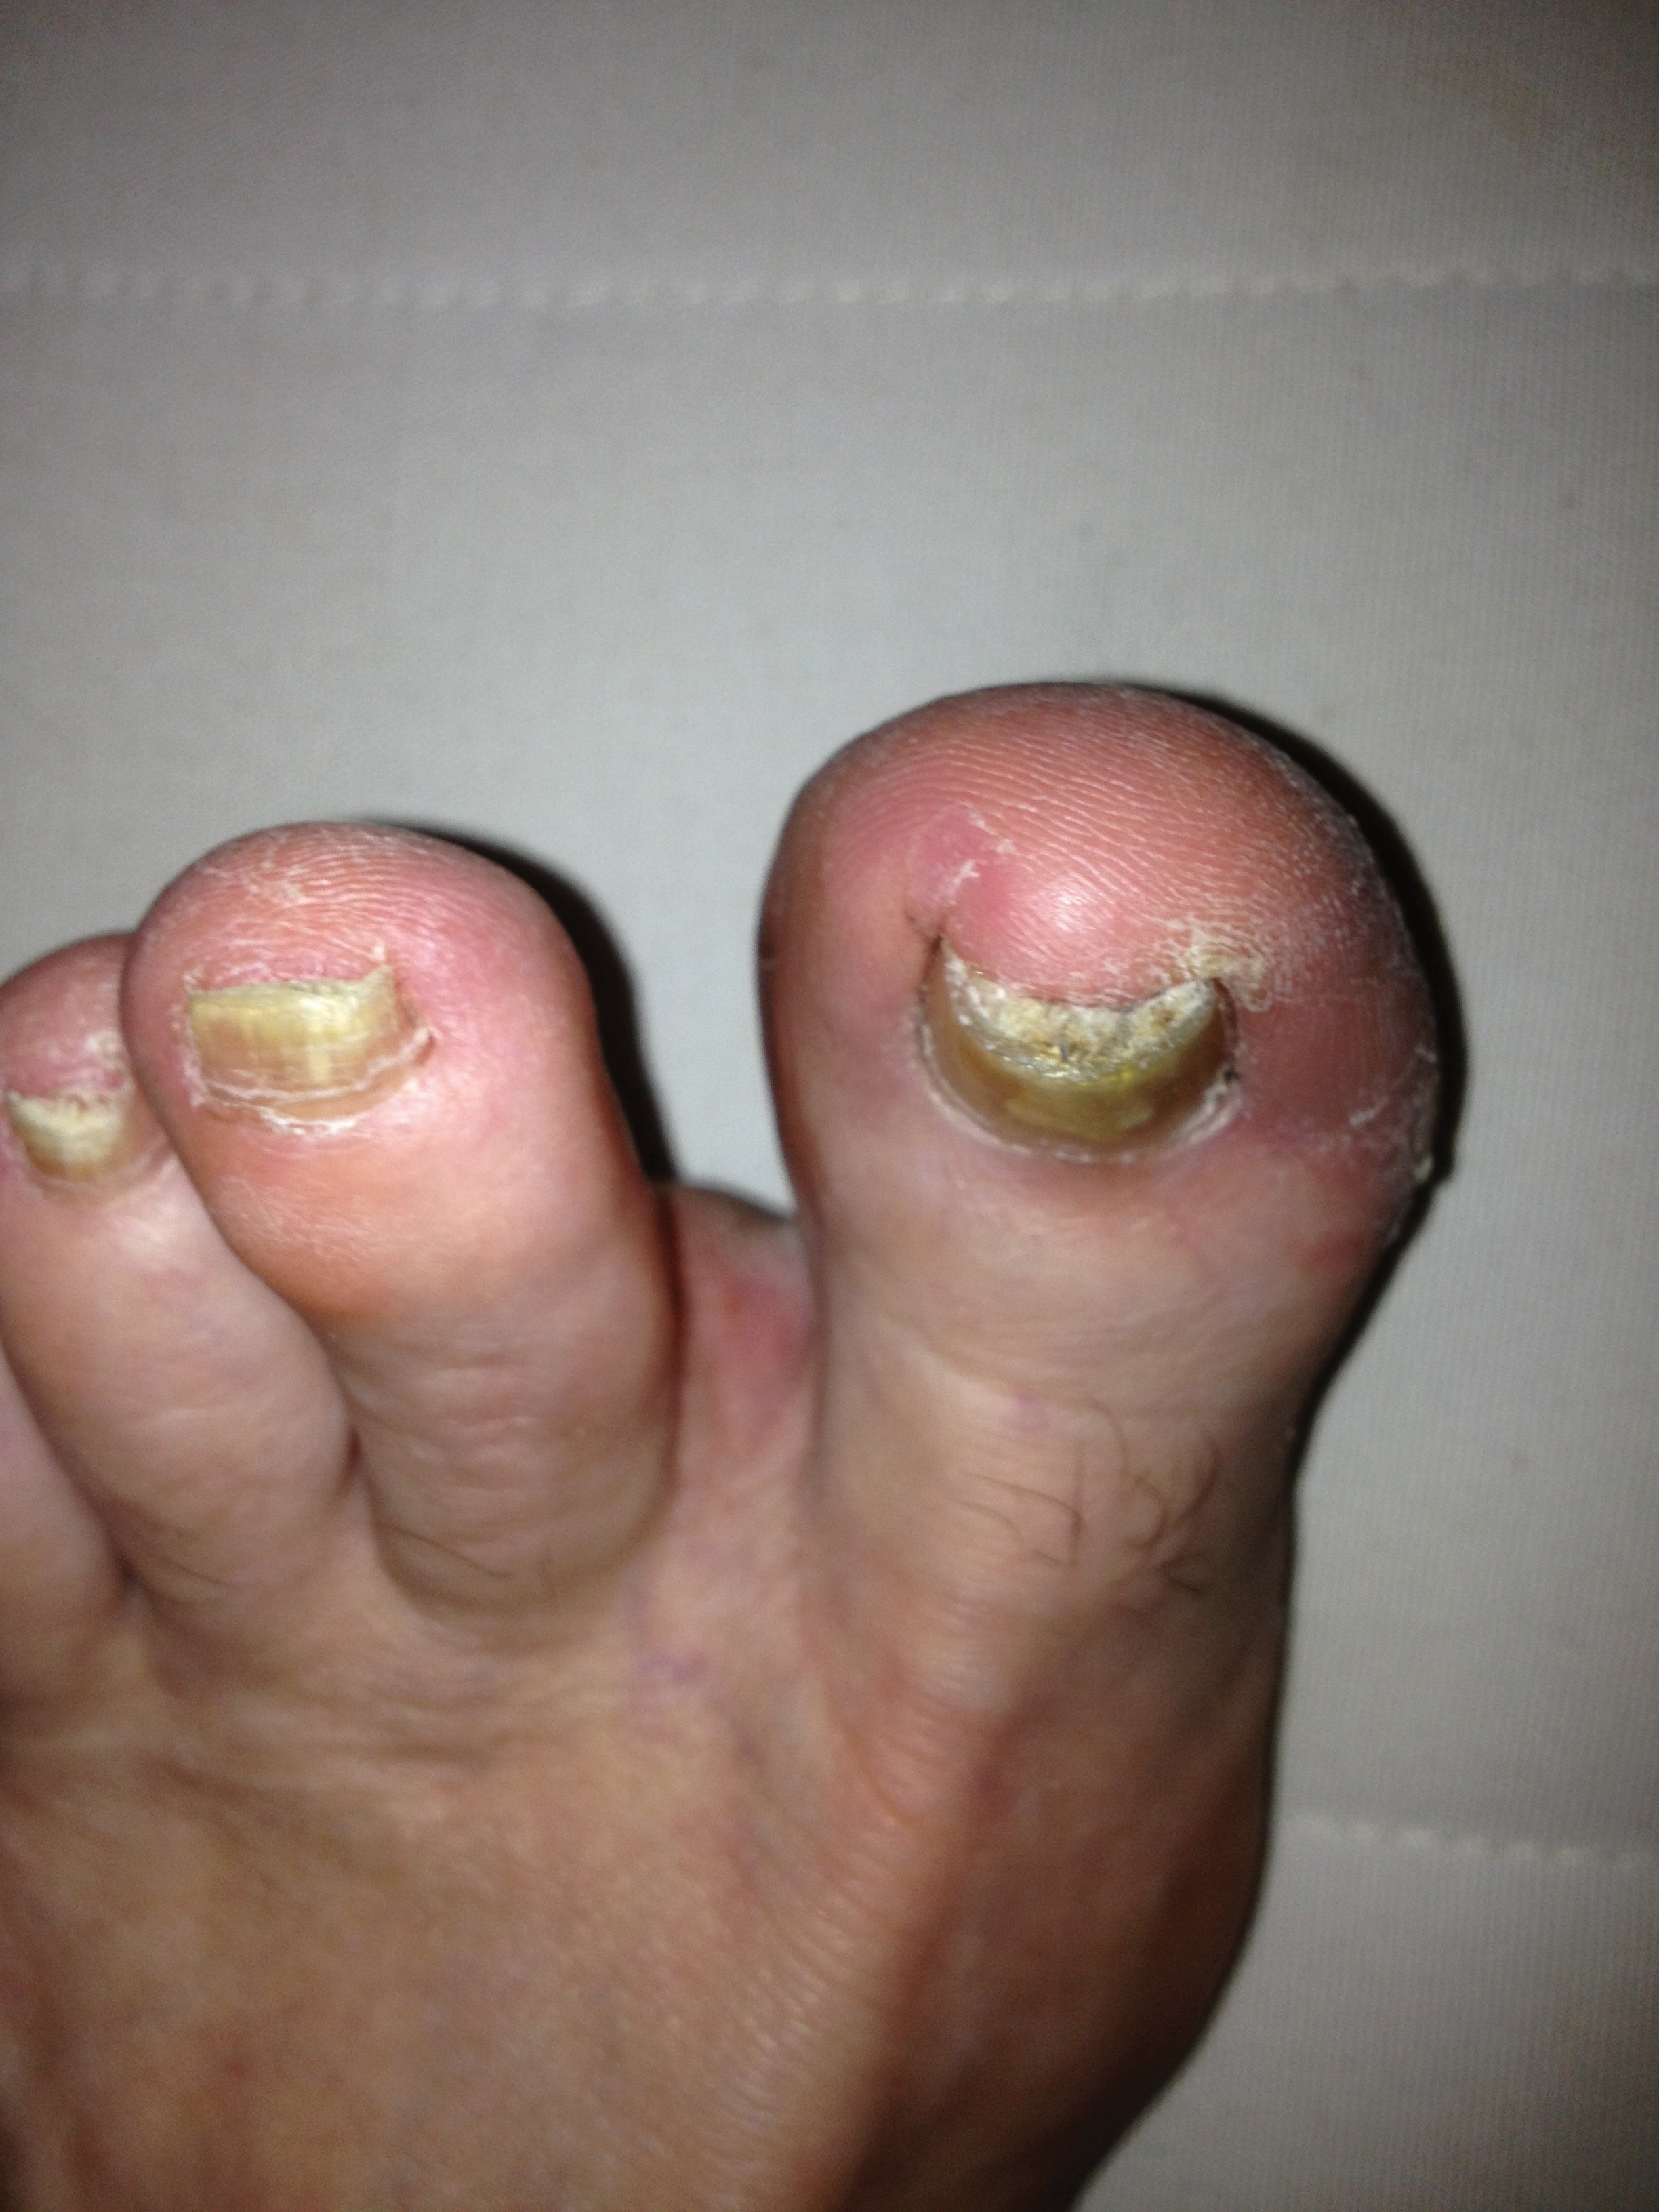 Causes, Symptoms and Treatments of Fungal Toenails